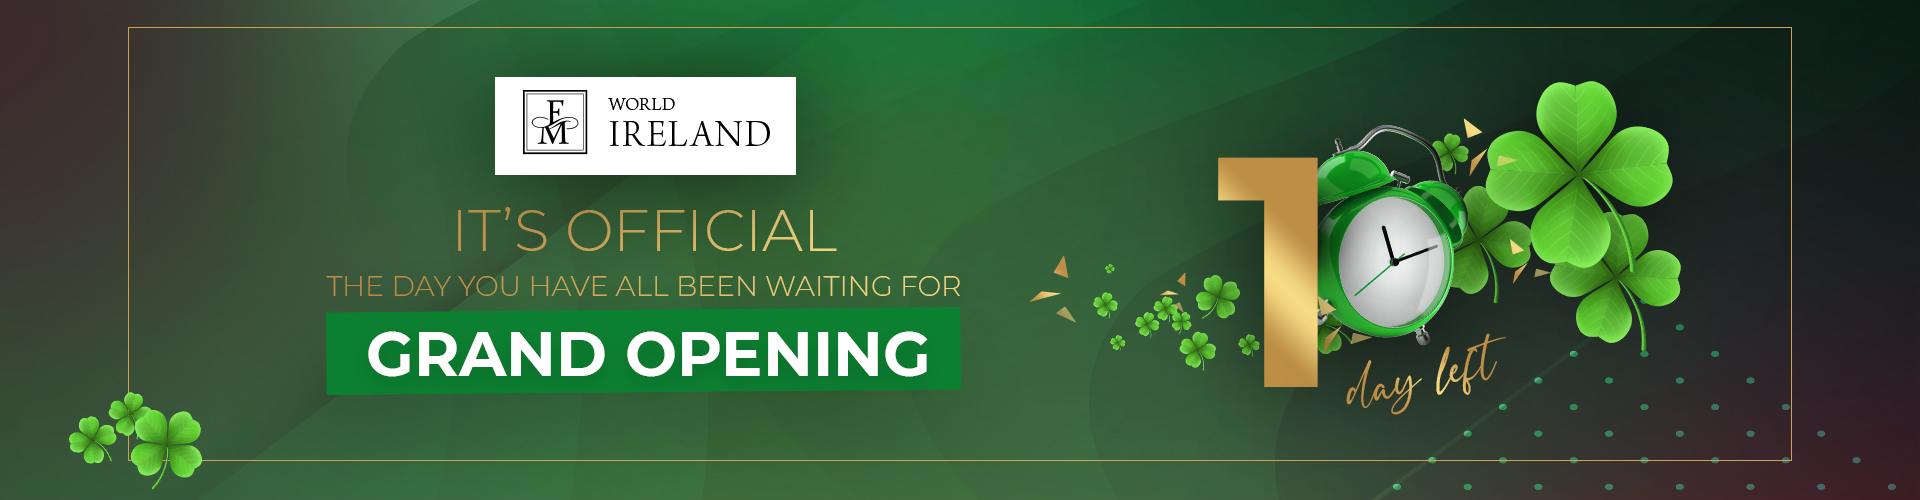 GRAND OPENNING - 1 day left!